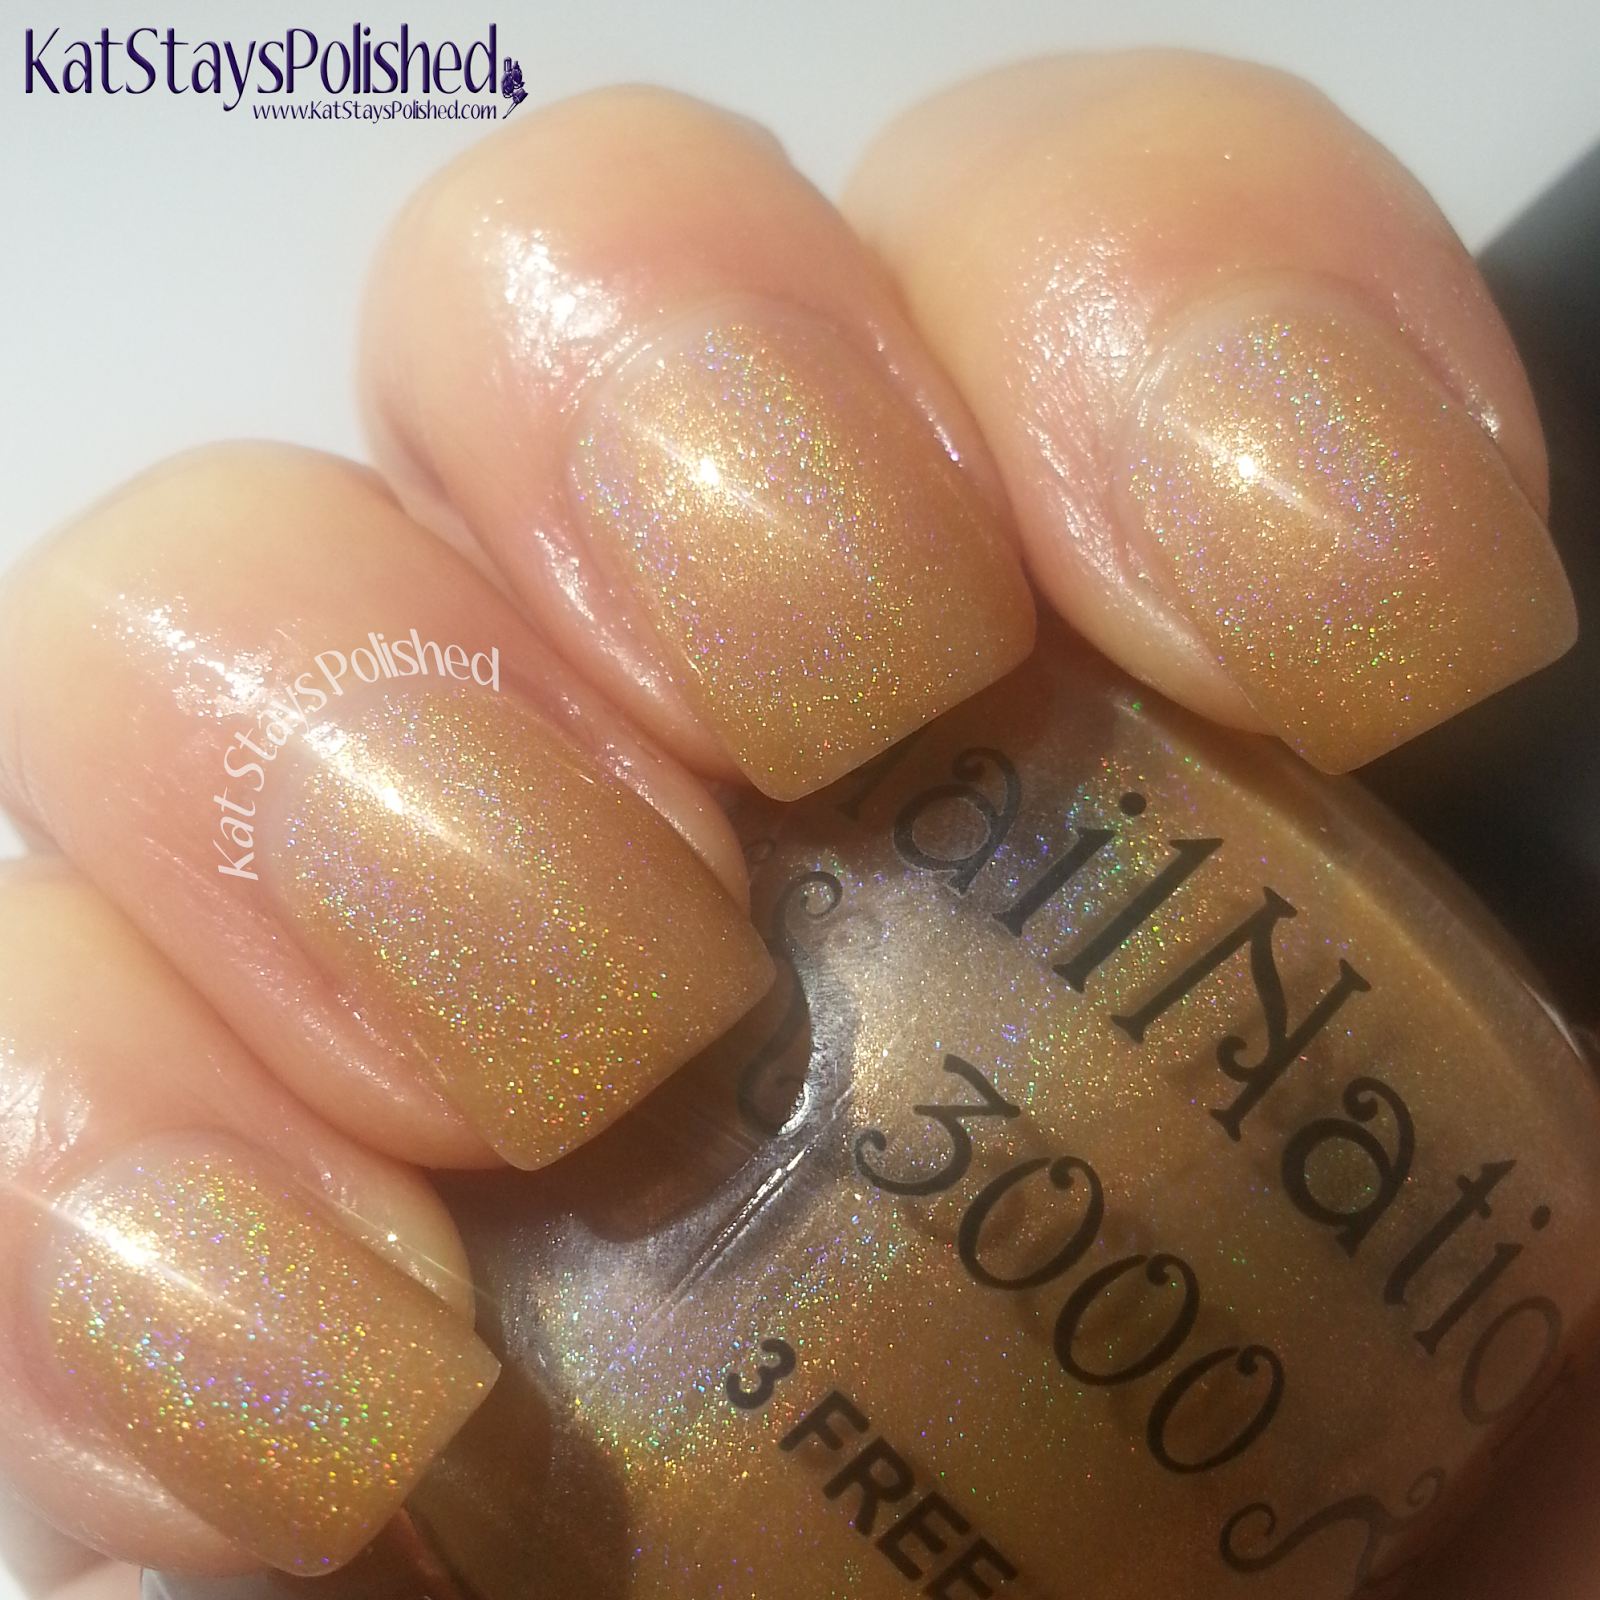 NailNation3000 - Holo in the Bad Lands | Kat Stays Polished